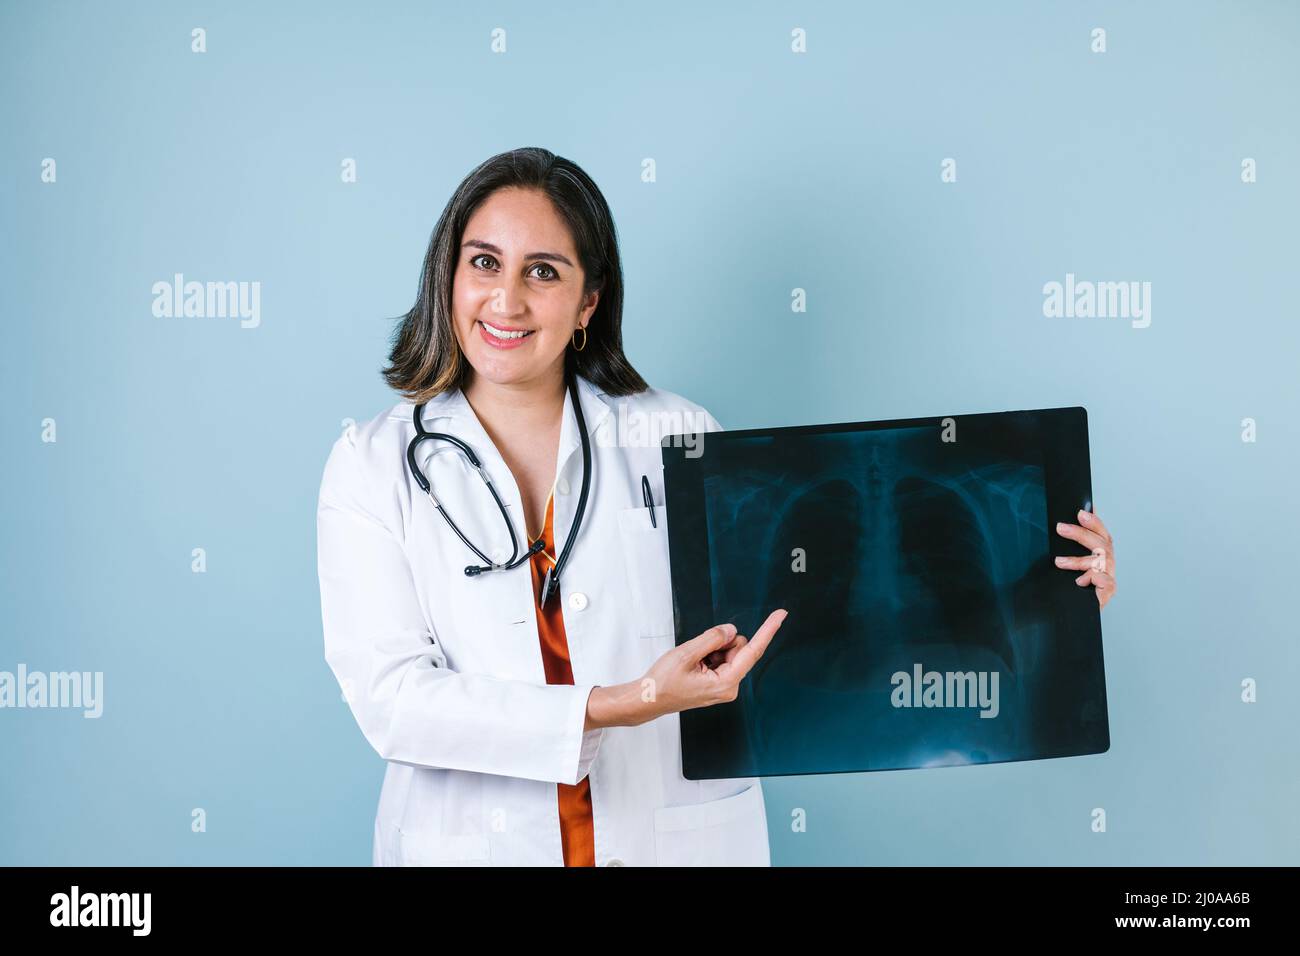 hispanic woman doctor looks at xray radiography images in radiology clinic on blue background in Mexico Latin America Stock Photo